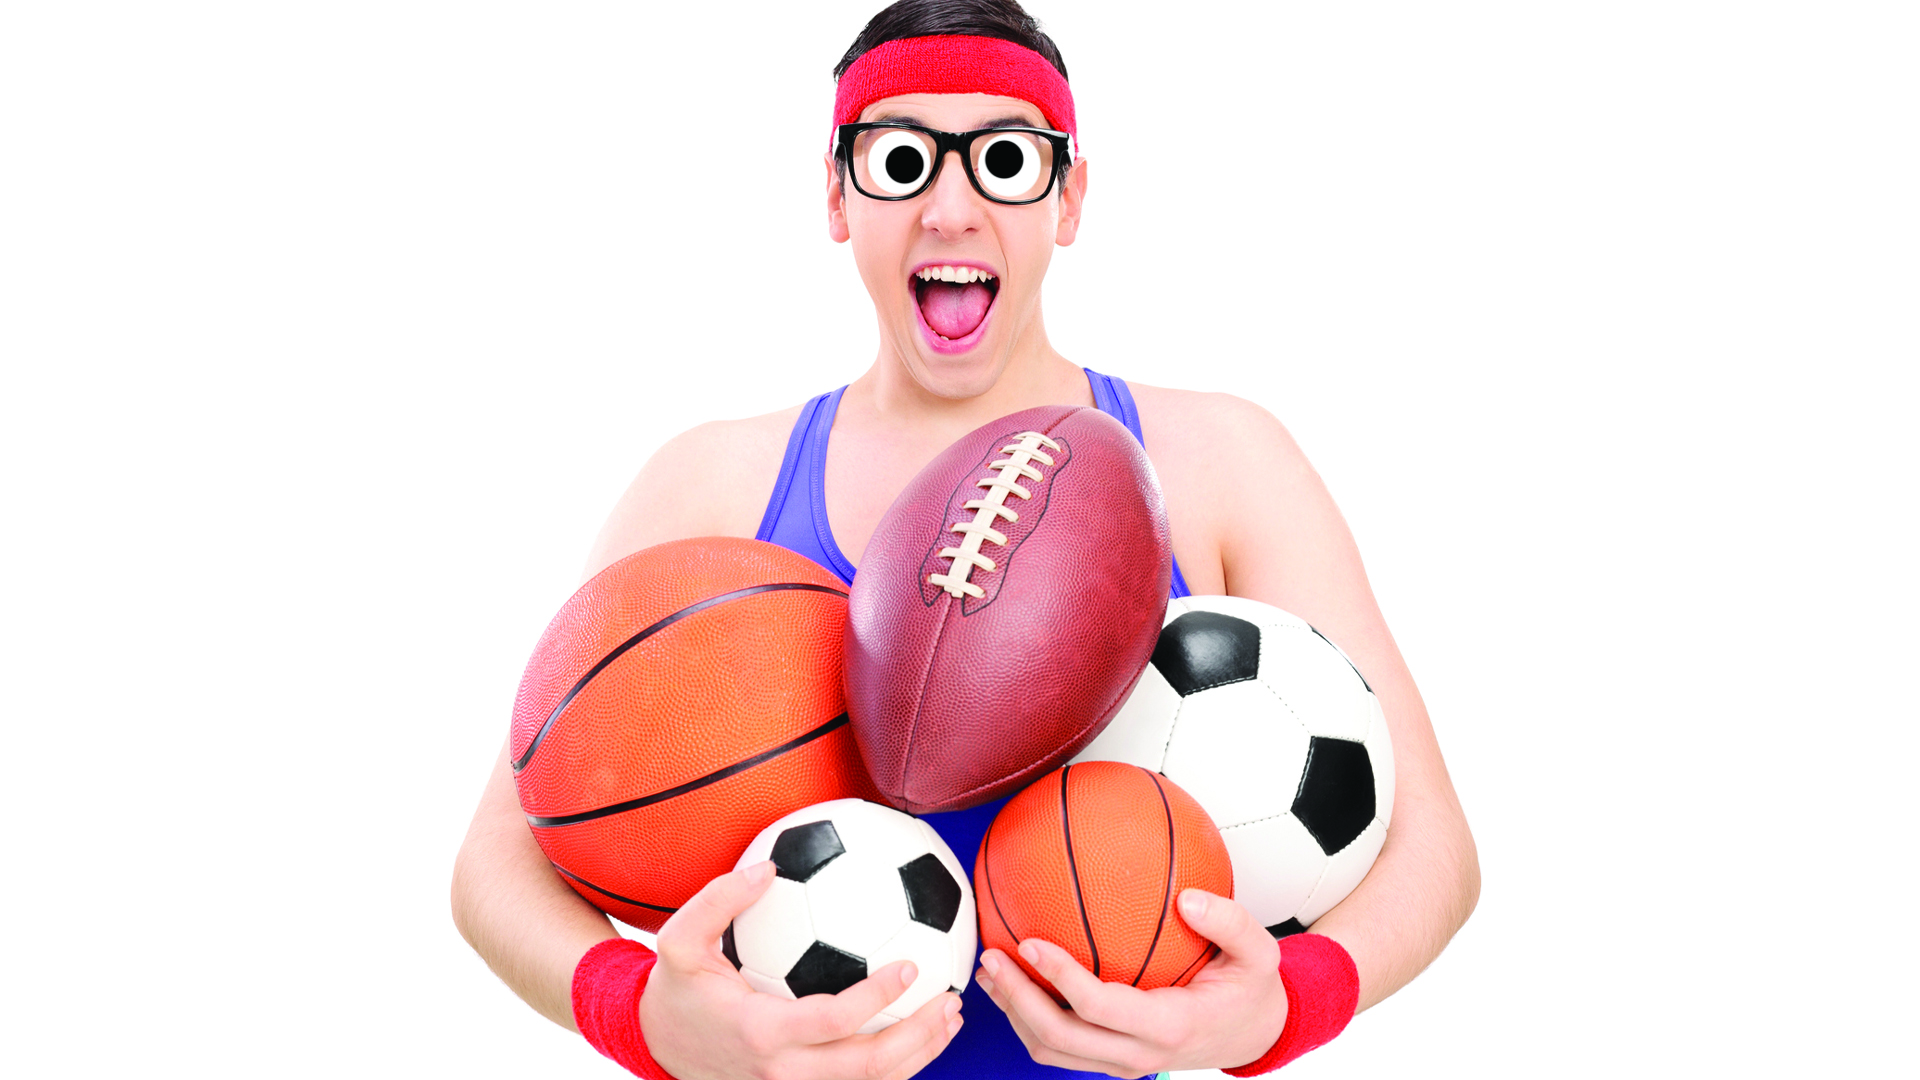 Person with all types of sports ball in their arms